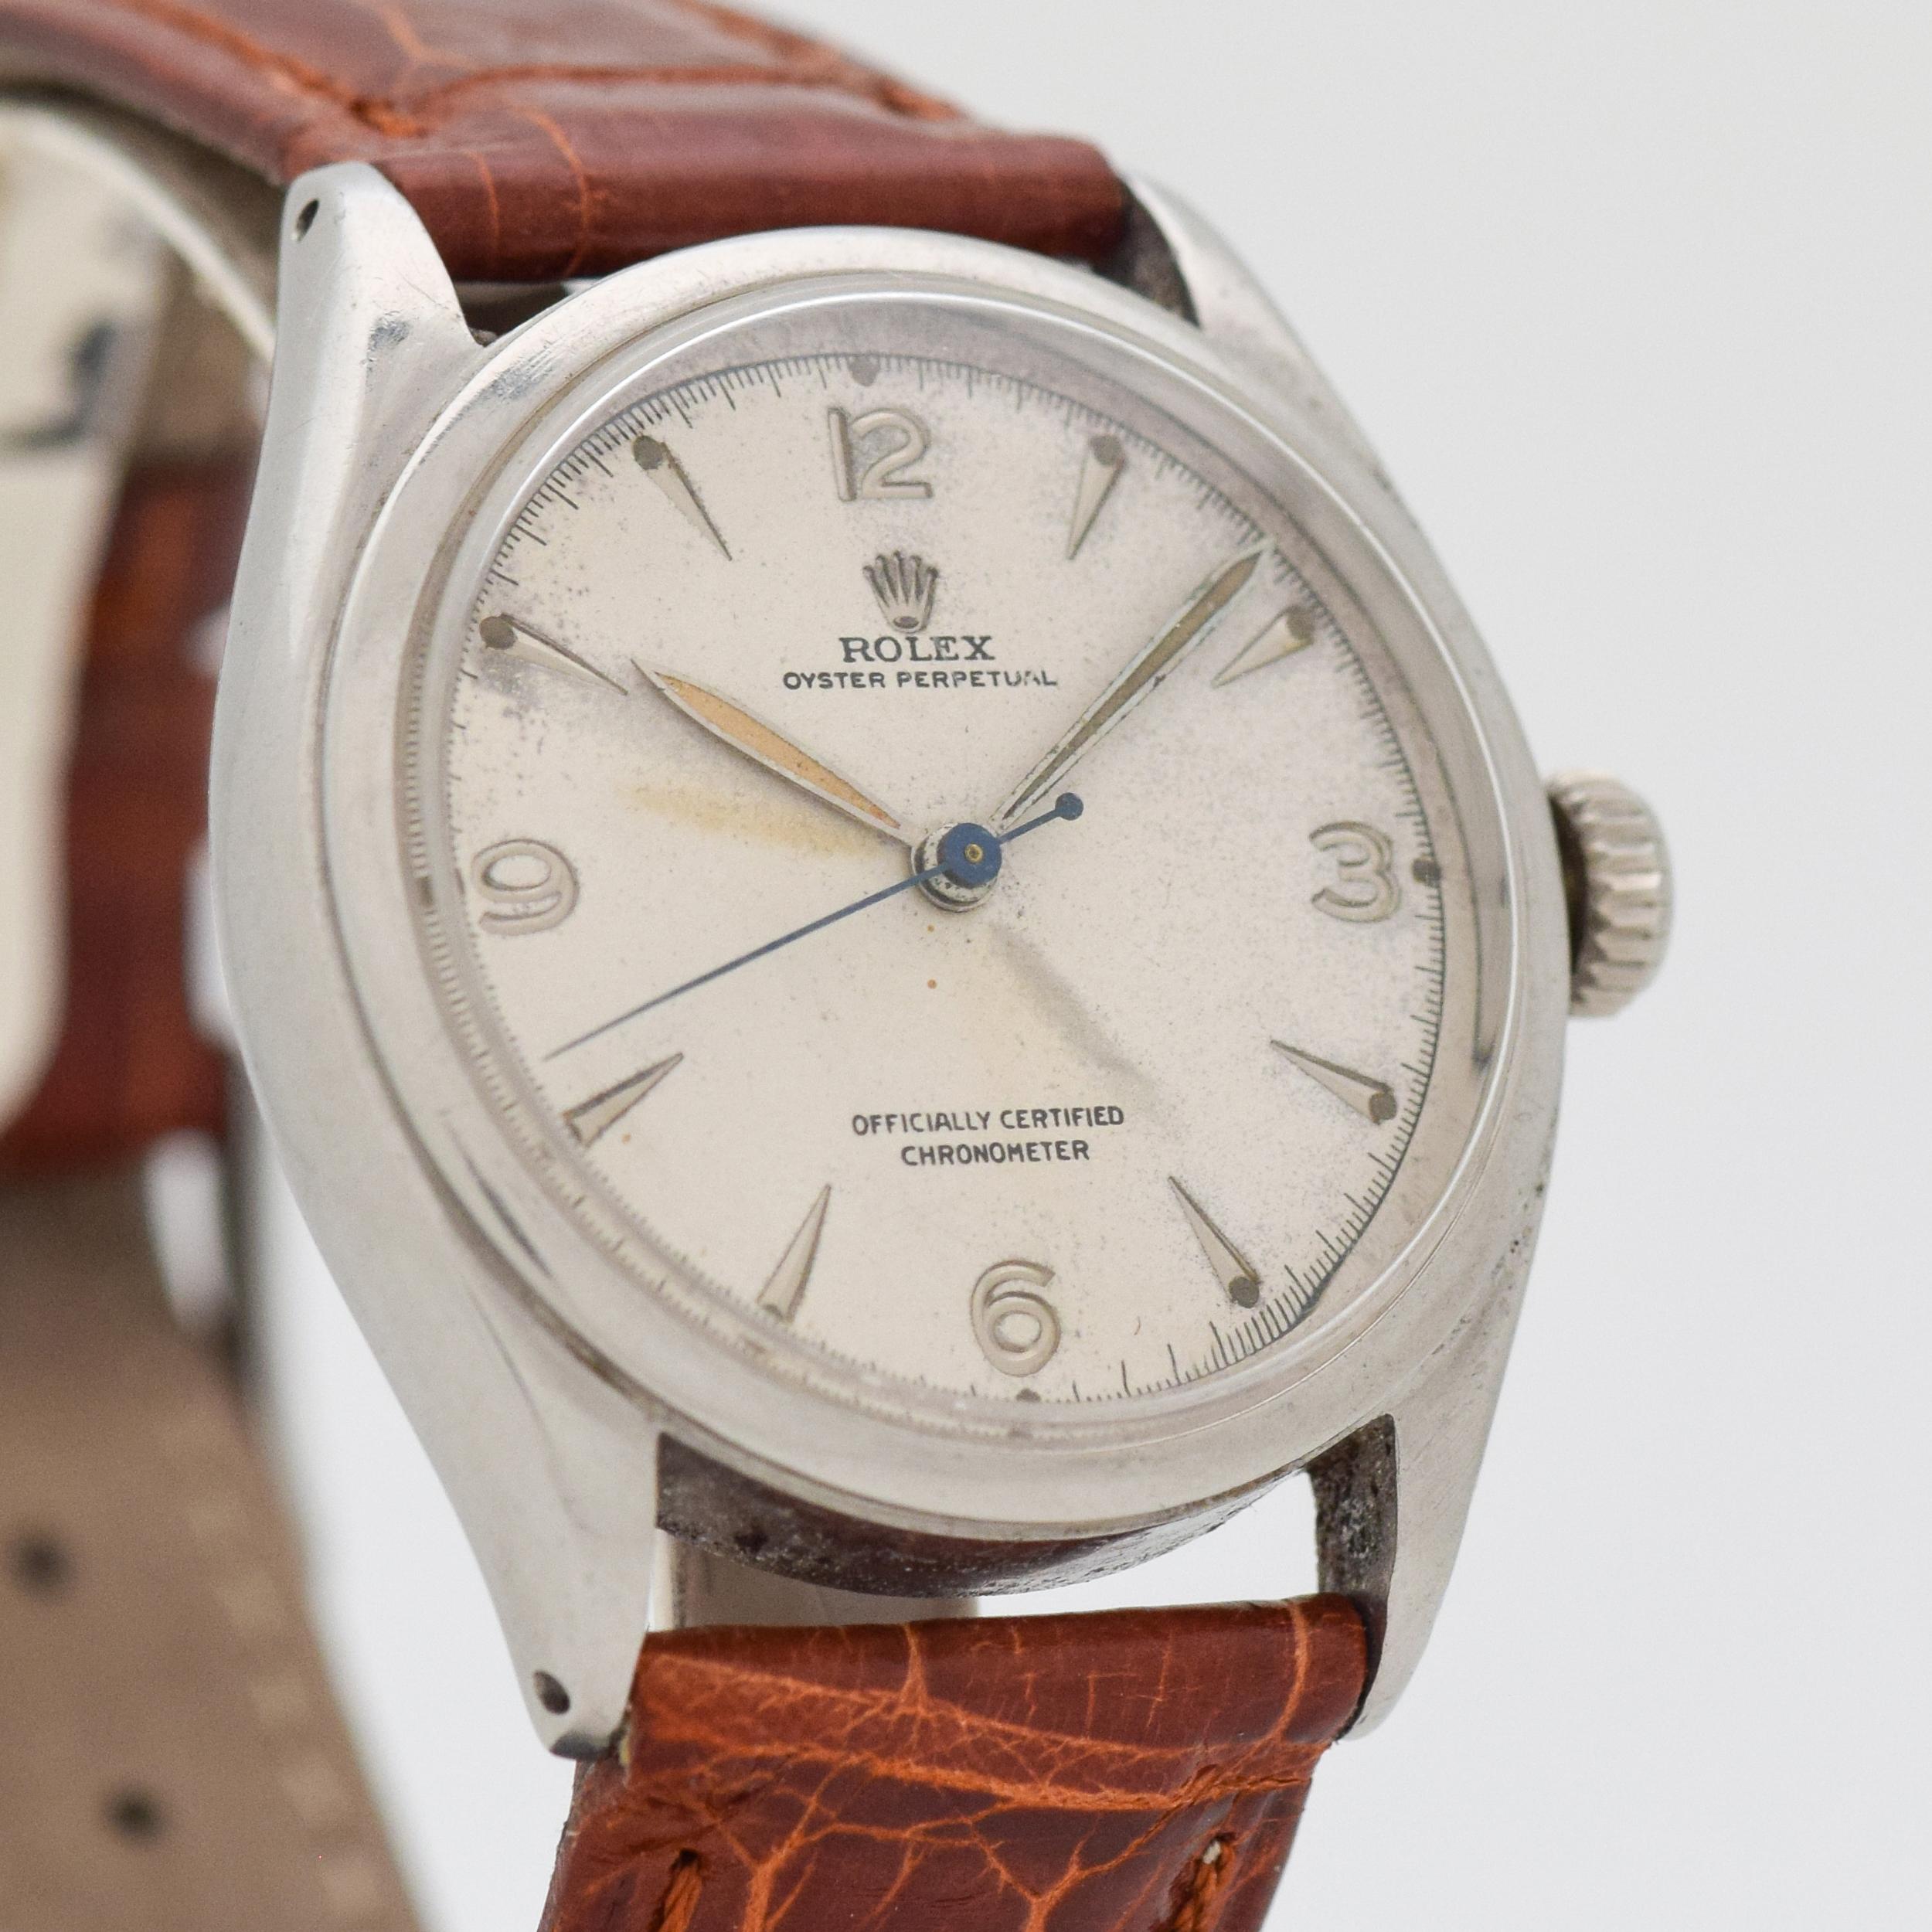 1952 Vintage Rolex Oyster Perpetual Ref. 6084 Stainless Steel watch with Silver Dial with Applied Steel Arabic 3, 6, 9, and 12 Plus Elongated Arrow Markers. 34mm x 38mm lug to lug (1.34 in. x 1.5 in.) - 17 jewel, automatic caliber movement. Triple